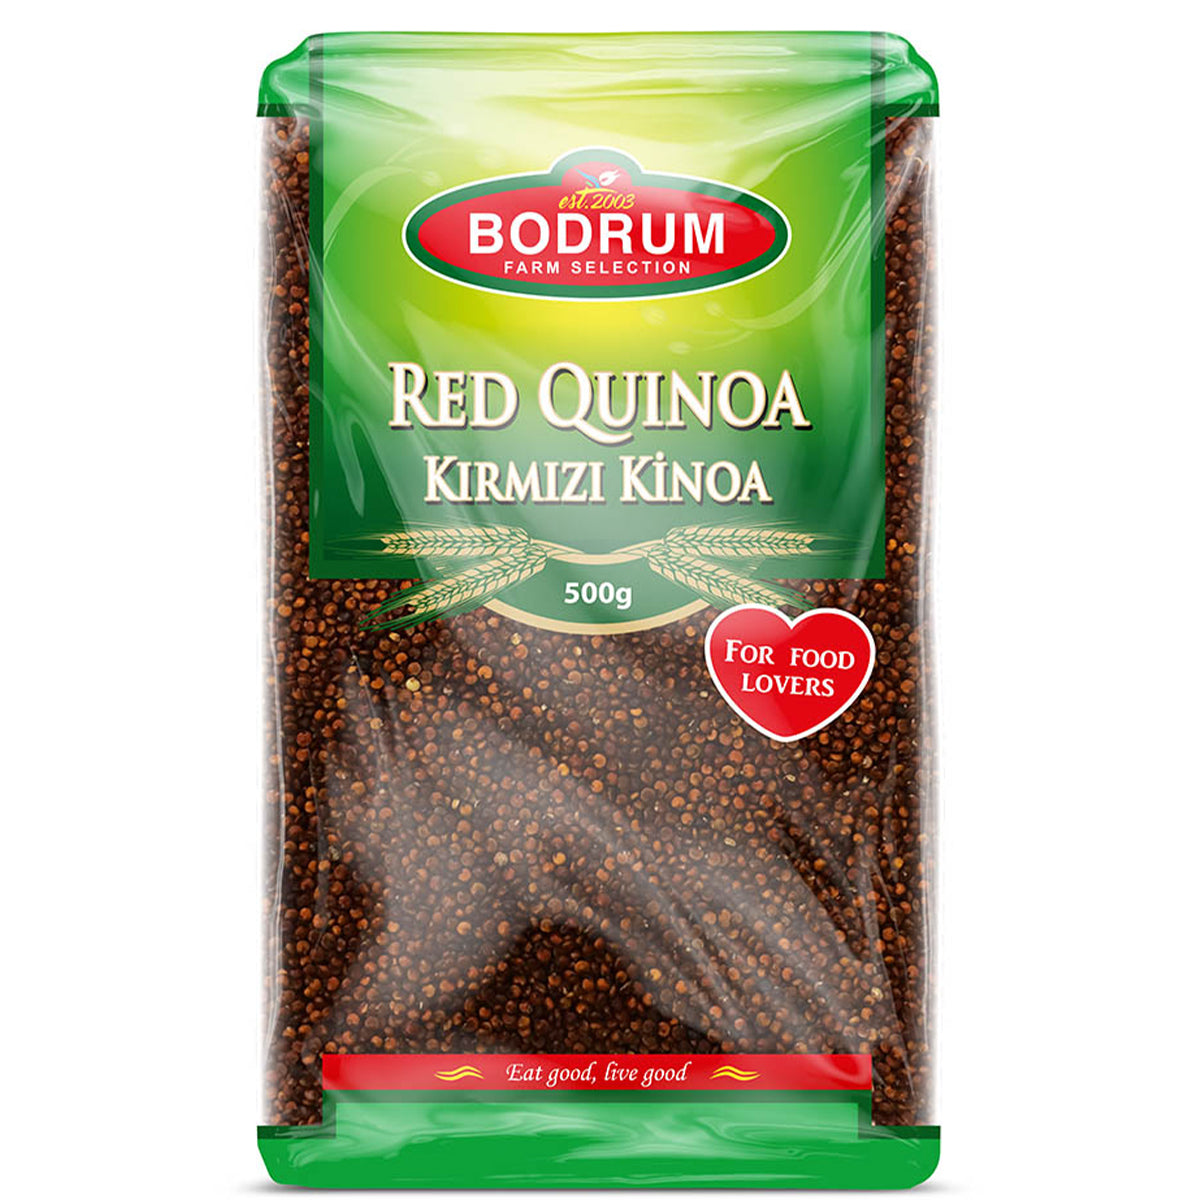 Bodrum - Red Quinoa - 500g - Continental Food Store